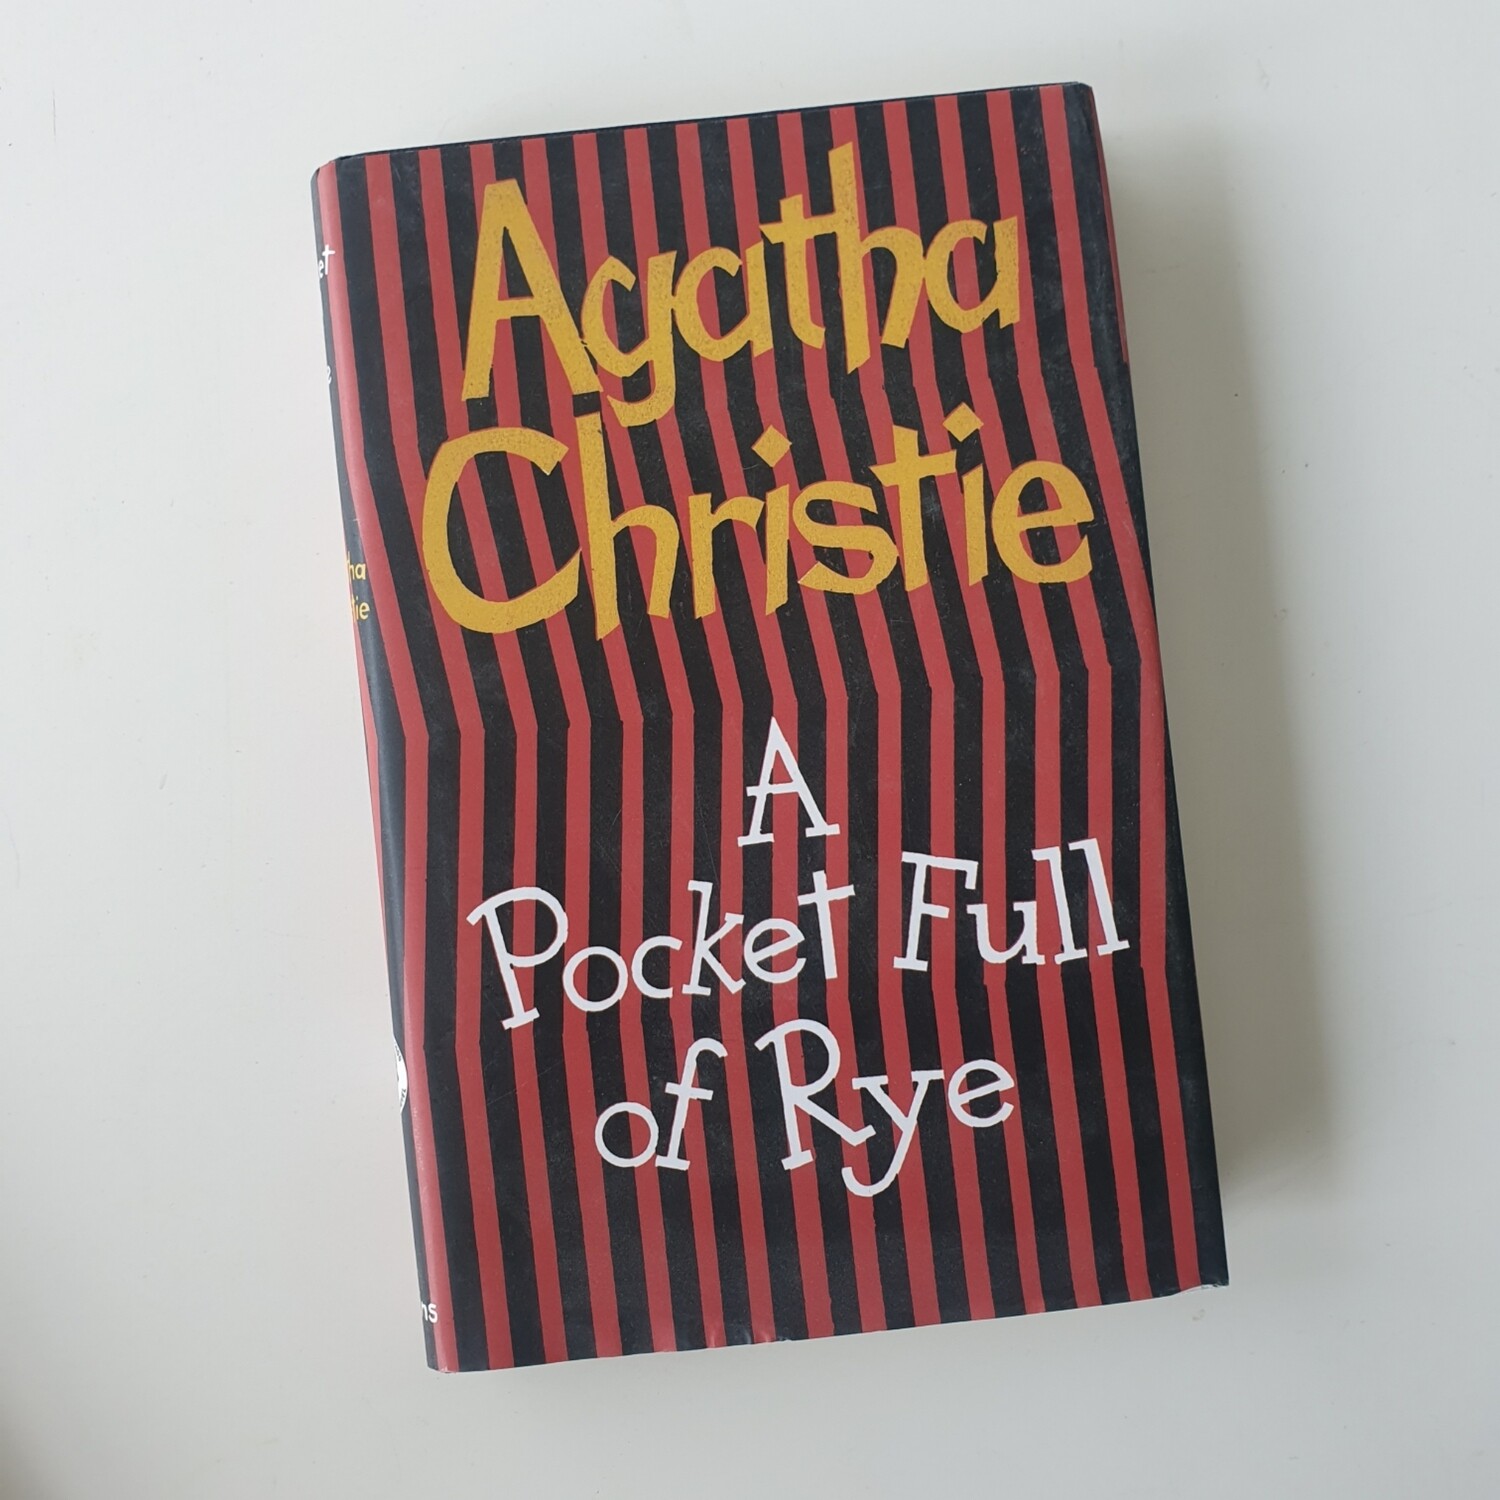 Agatha Christie - A Pocket Full of Rye Notebook - made from a dust jacket